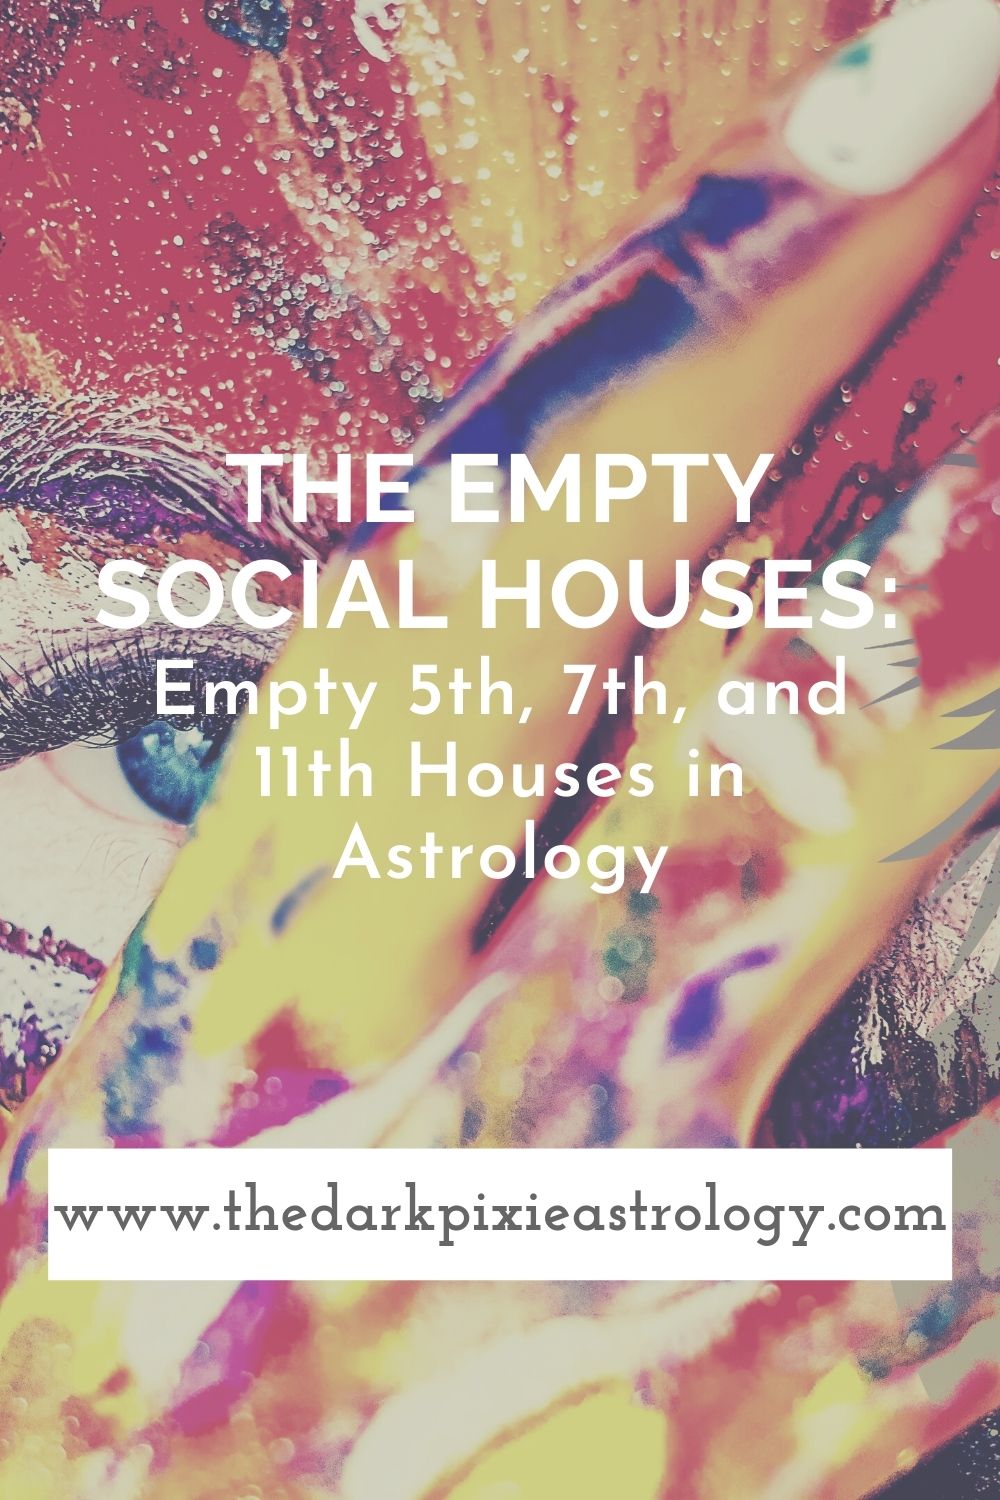 The Empty Social Houses: Empty 5th, 7th, and 11th Houses in Astrology - The Dark Pixie Astrology